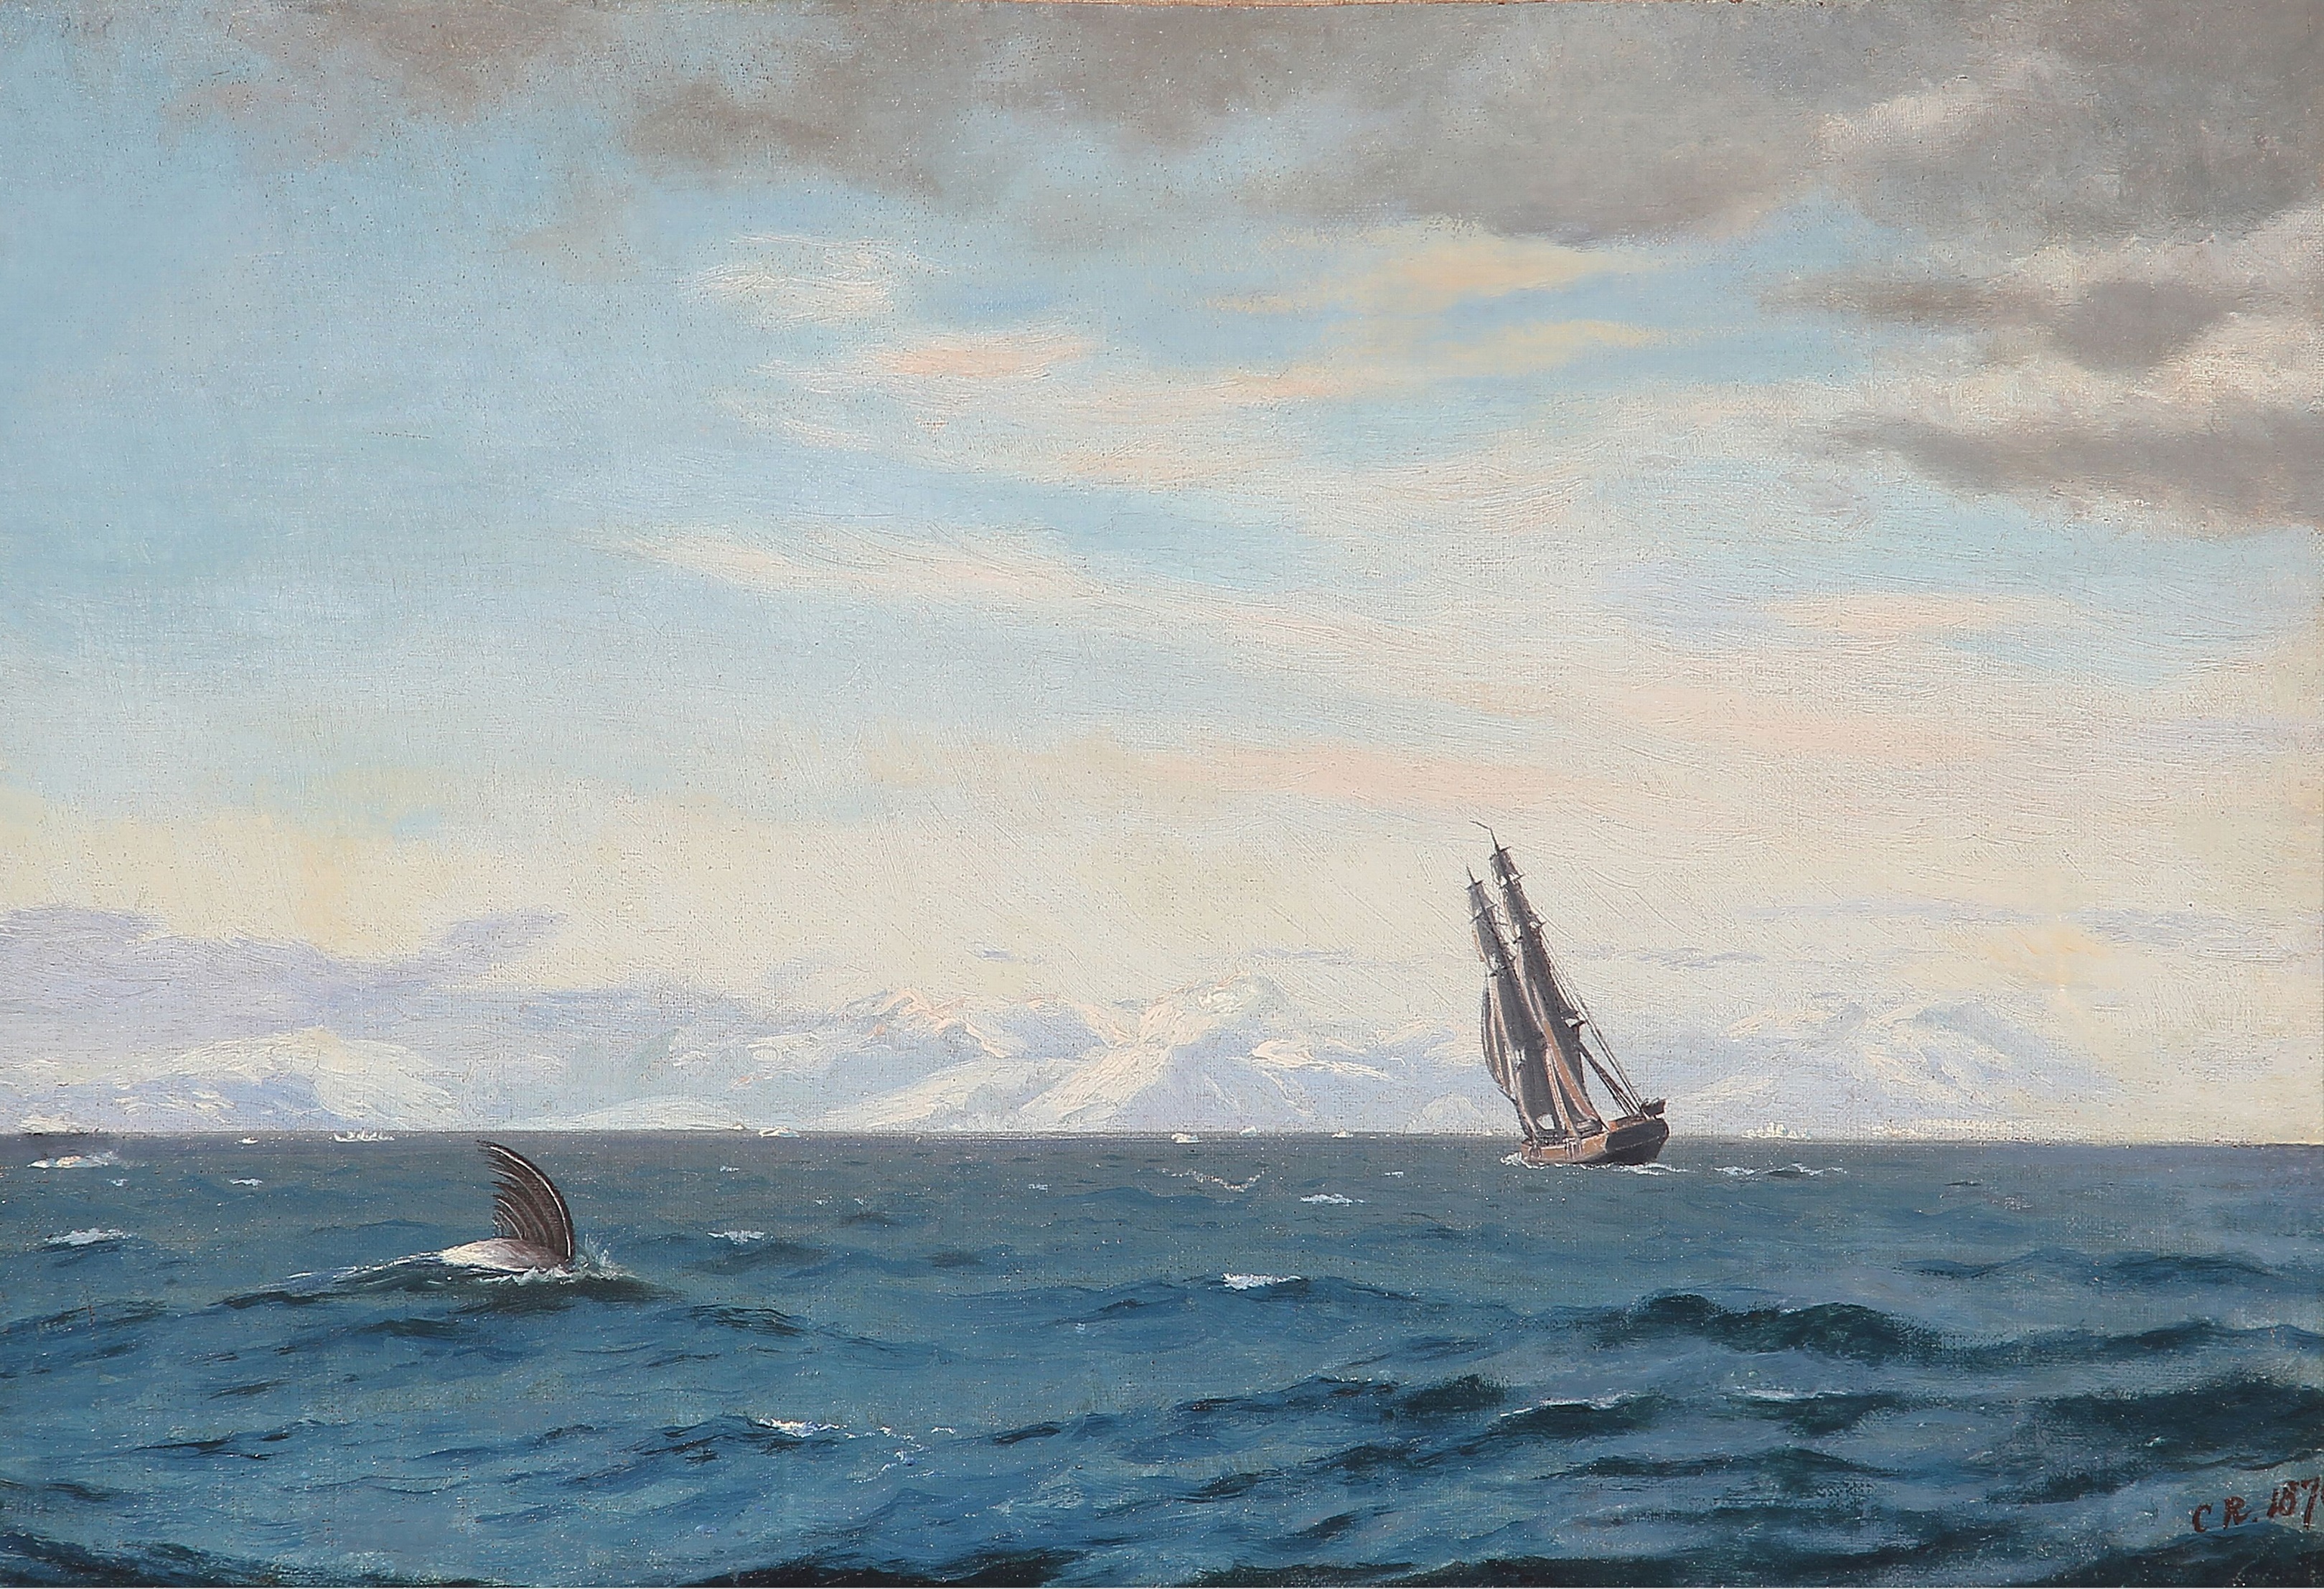 I. E. C. Rasmussen - Humpback whale and sailing ship in the Davis Strait (1870)